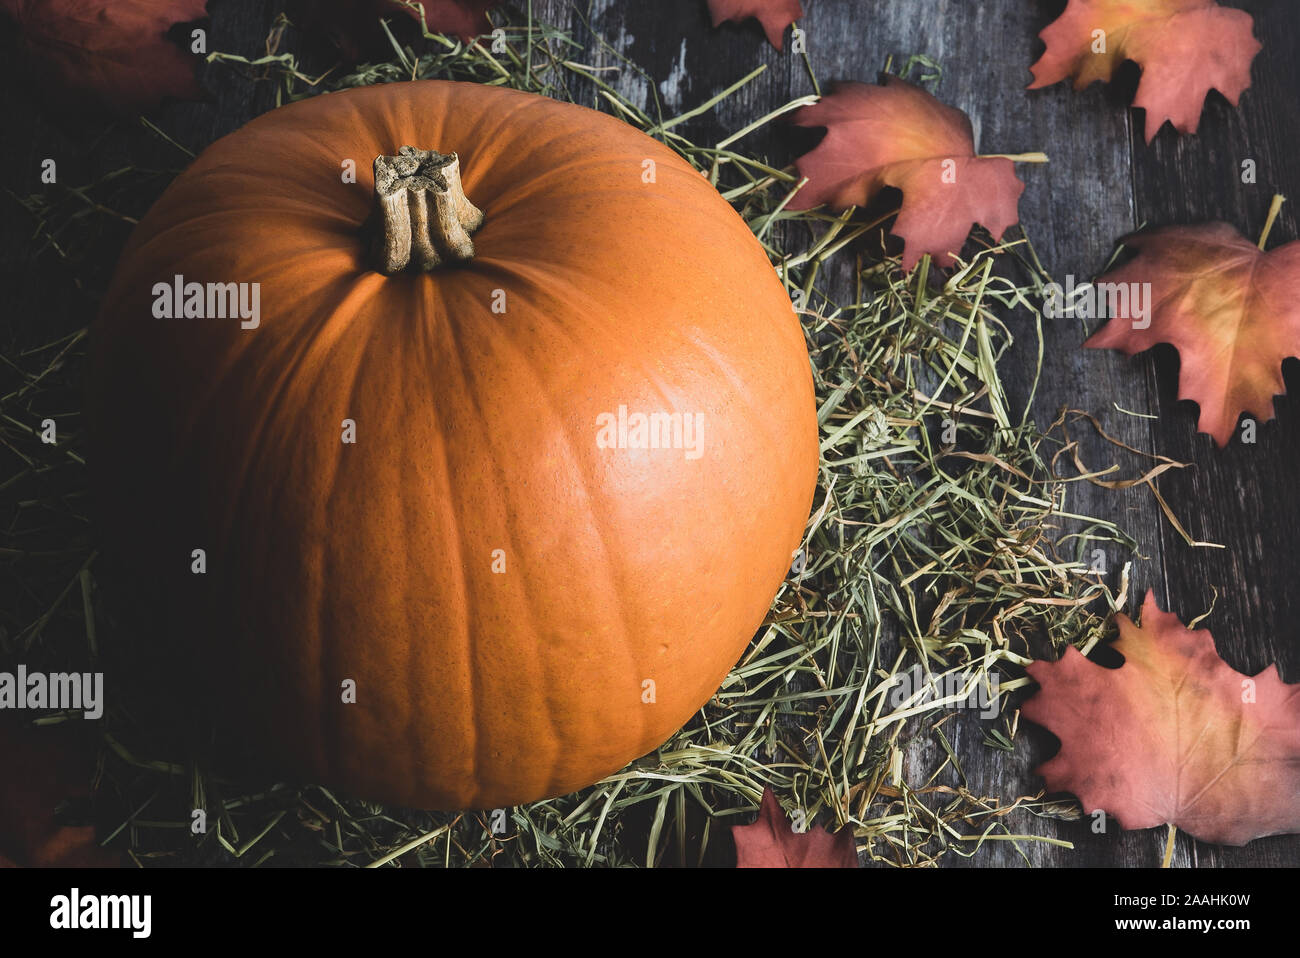 Big rural decorative orange pumpkin on  rustic wooden background with rural hay and autumn foliage as festive holiday decor for thanksgiving,halloween Stock Photo